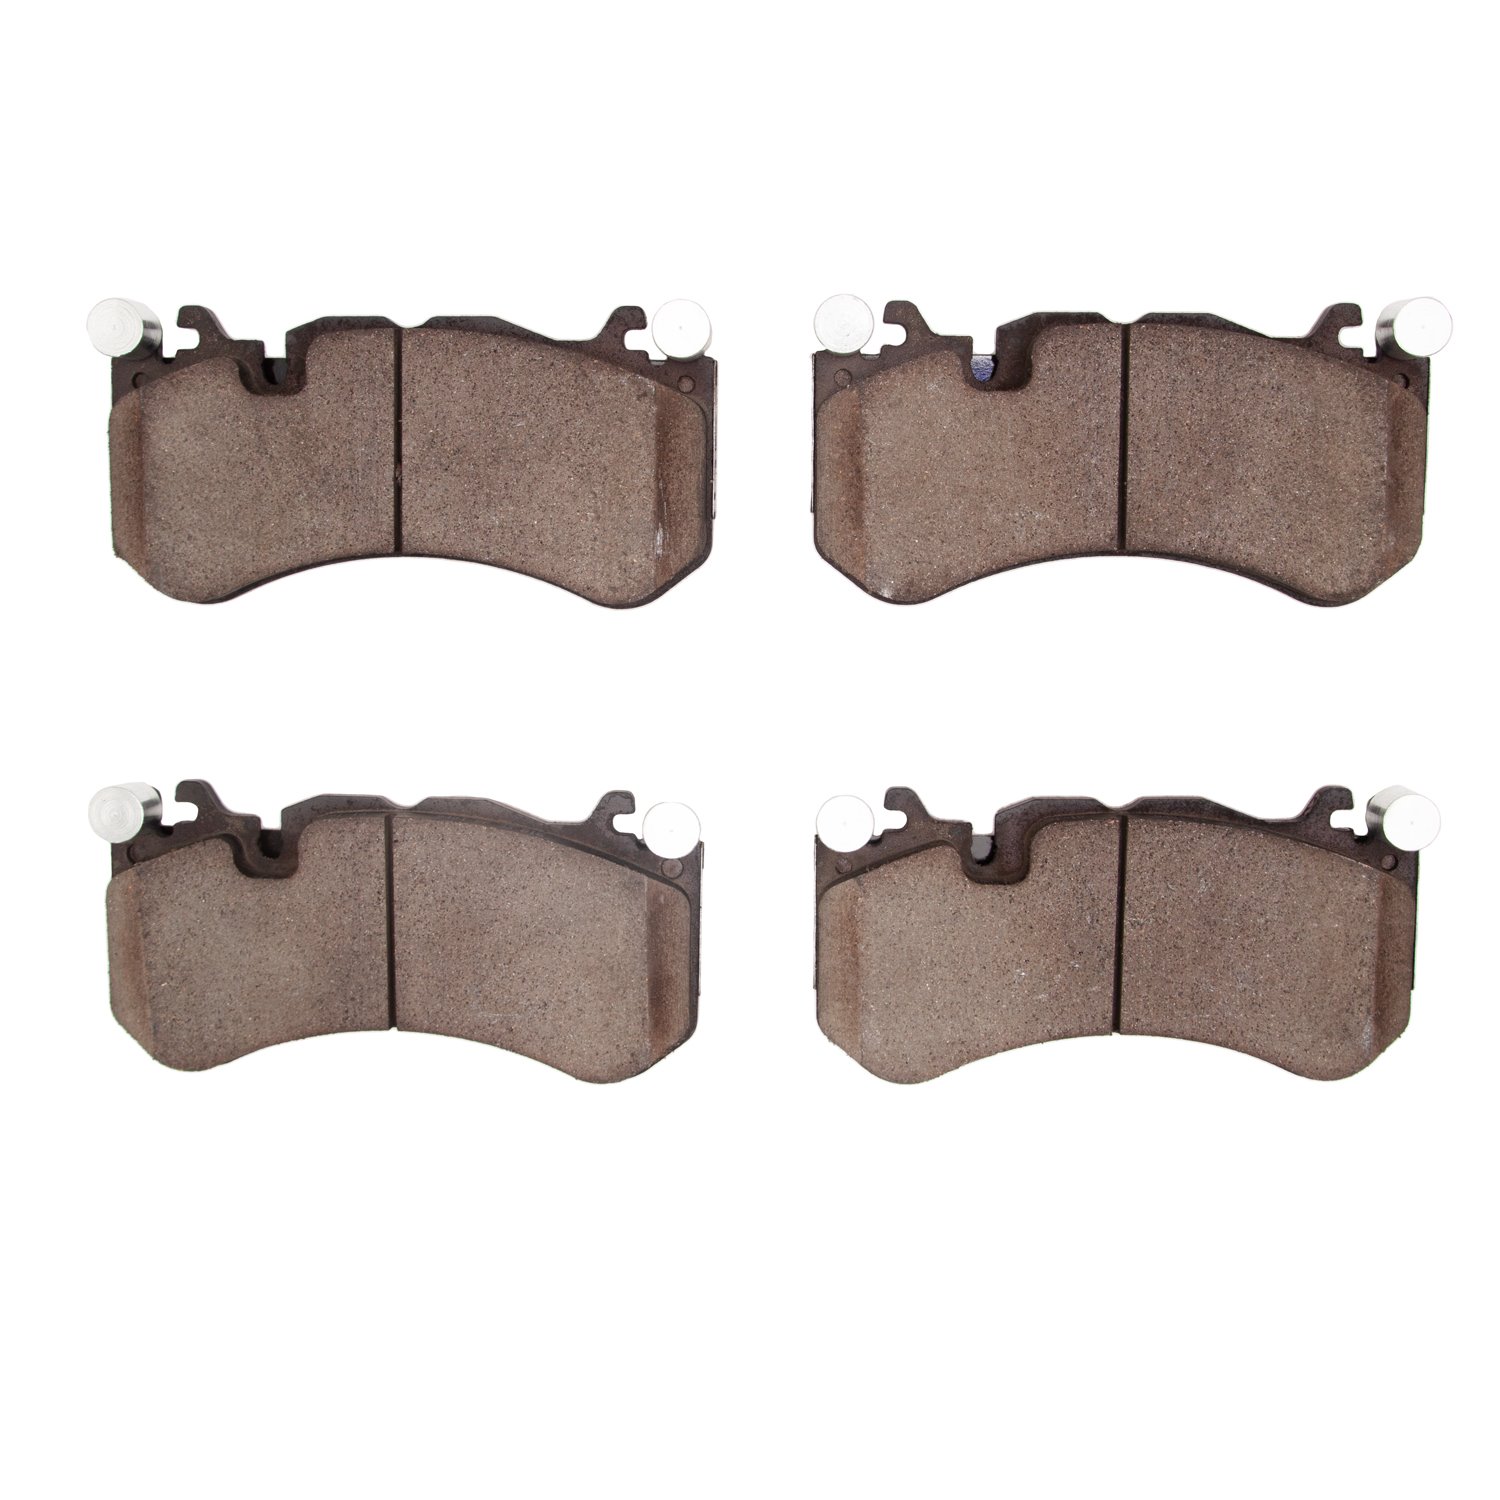 Active Performance Low-Metallic Brake Pads, Fits Select Multiple